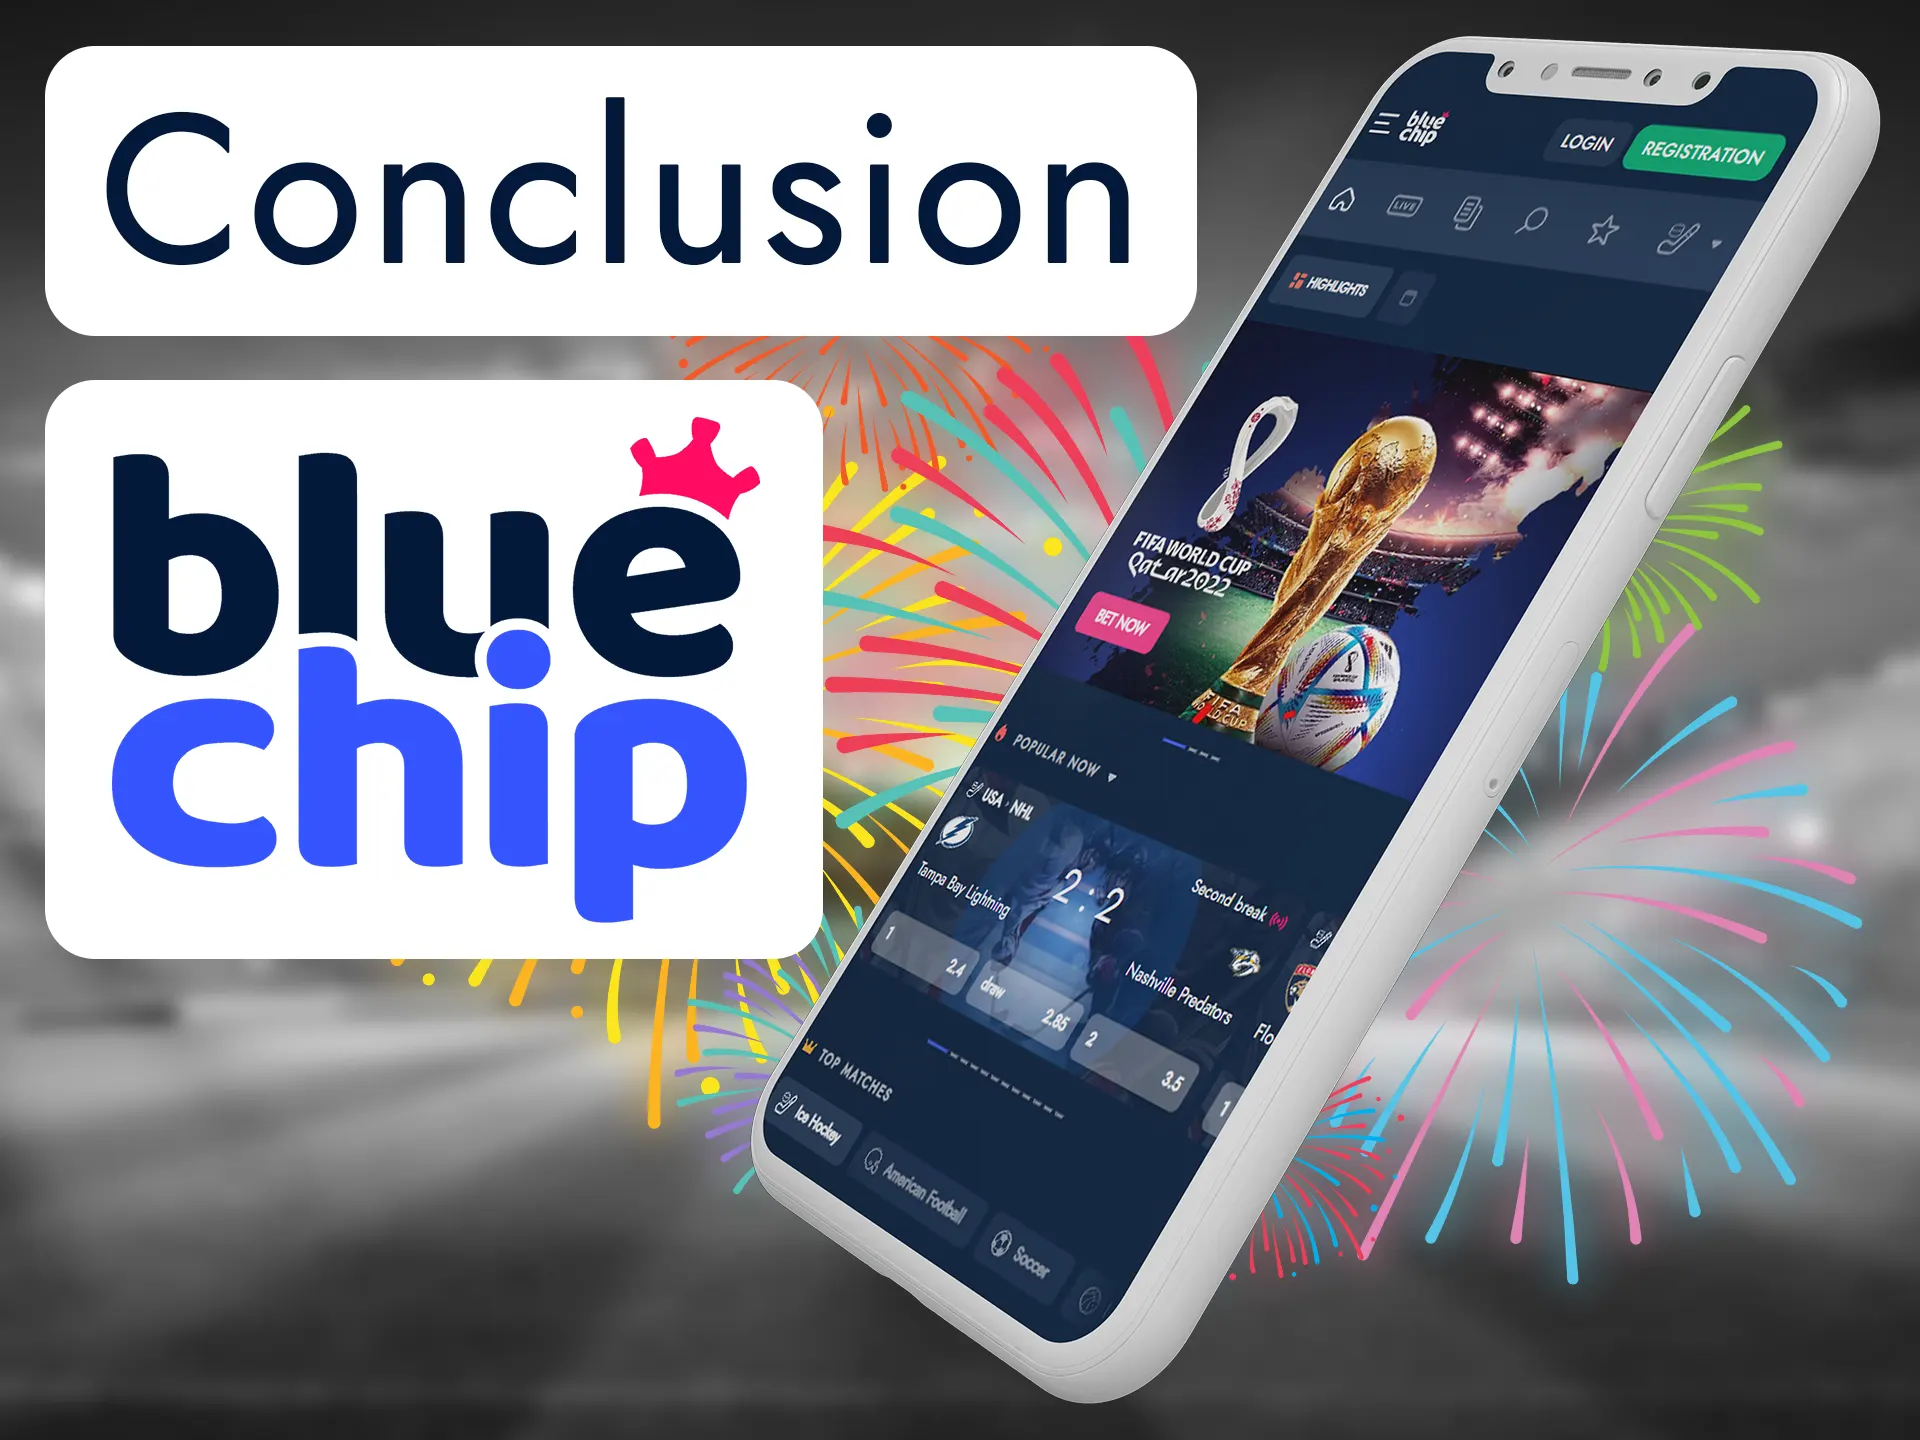 Bluechip app is great for betting.